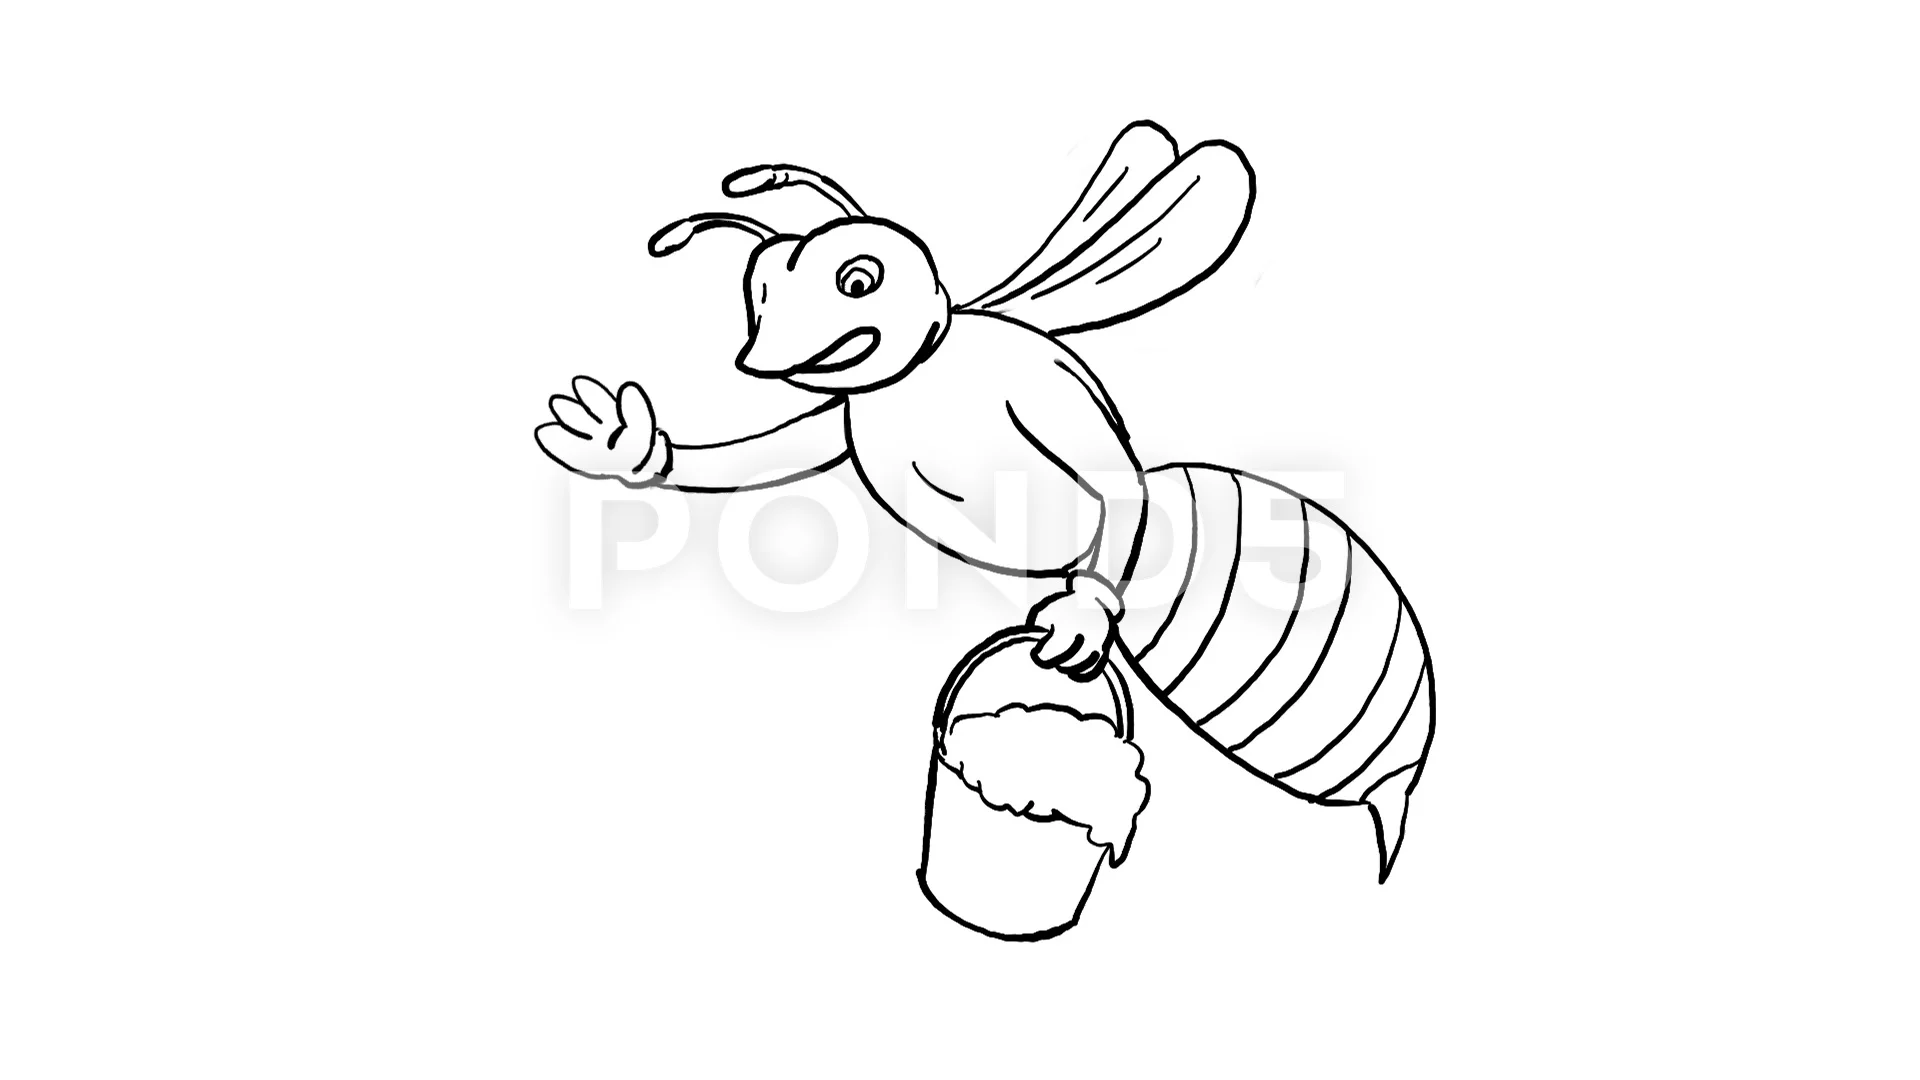 Honey Bee Waving With Pail of Honey Draw... | Stock Video | Pond5